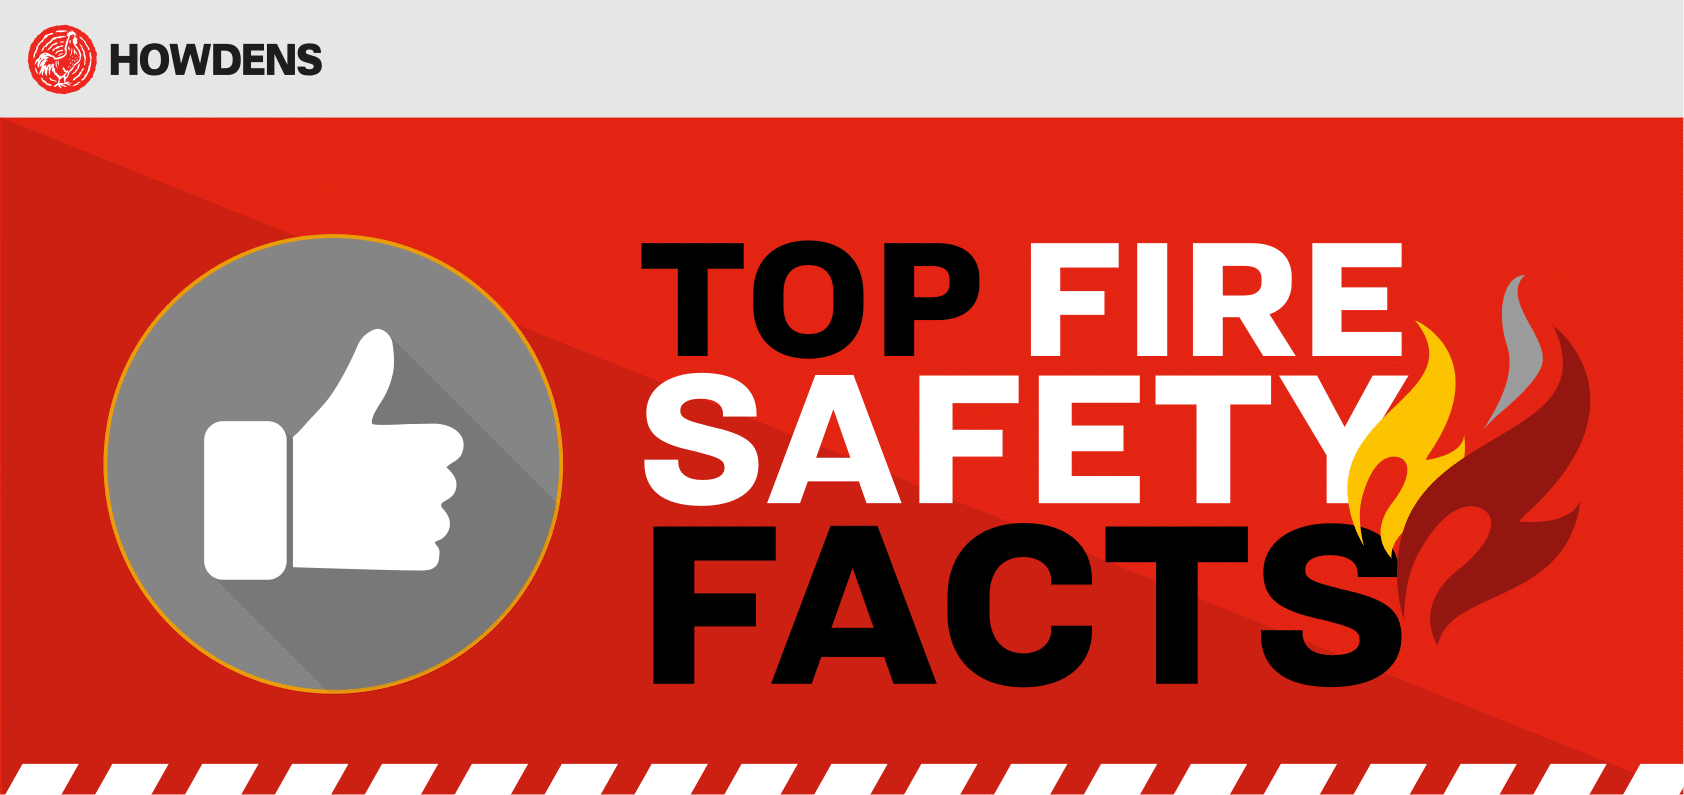 Help your tenants feel safe with our fire safety checklist - https://roomslocal.co.uk/blog/help-your-tenants-feel-safe-with-our-fire-safety-checklist #tenants #feel #safe #fire #safety